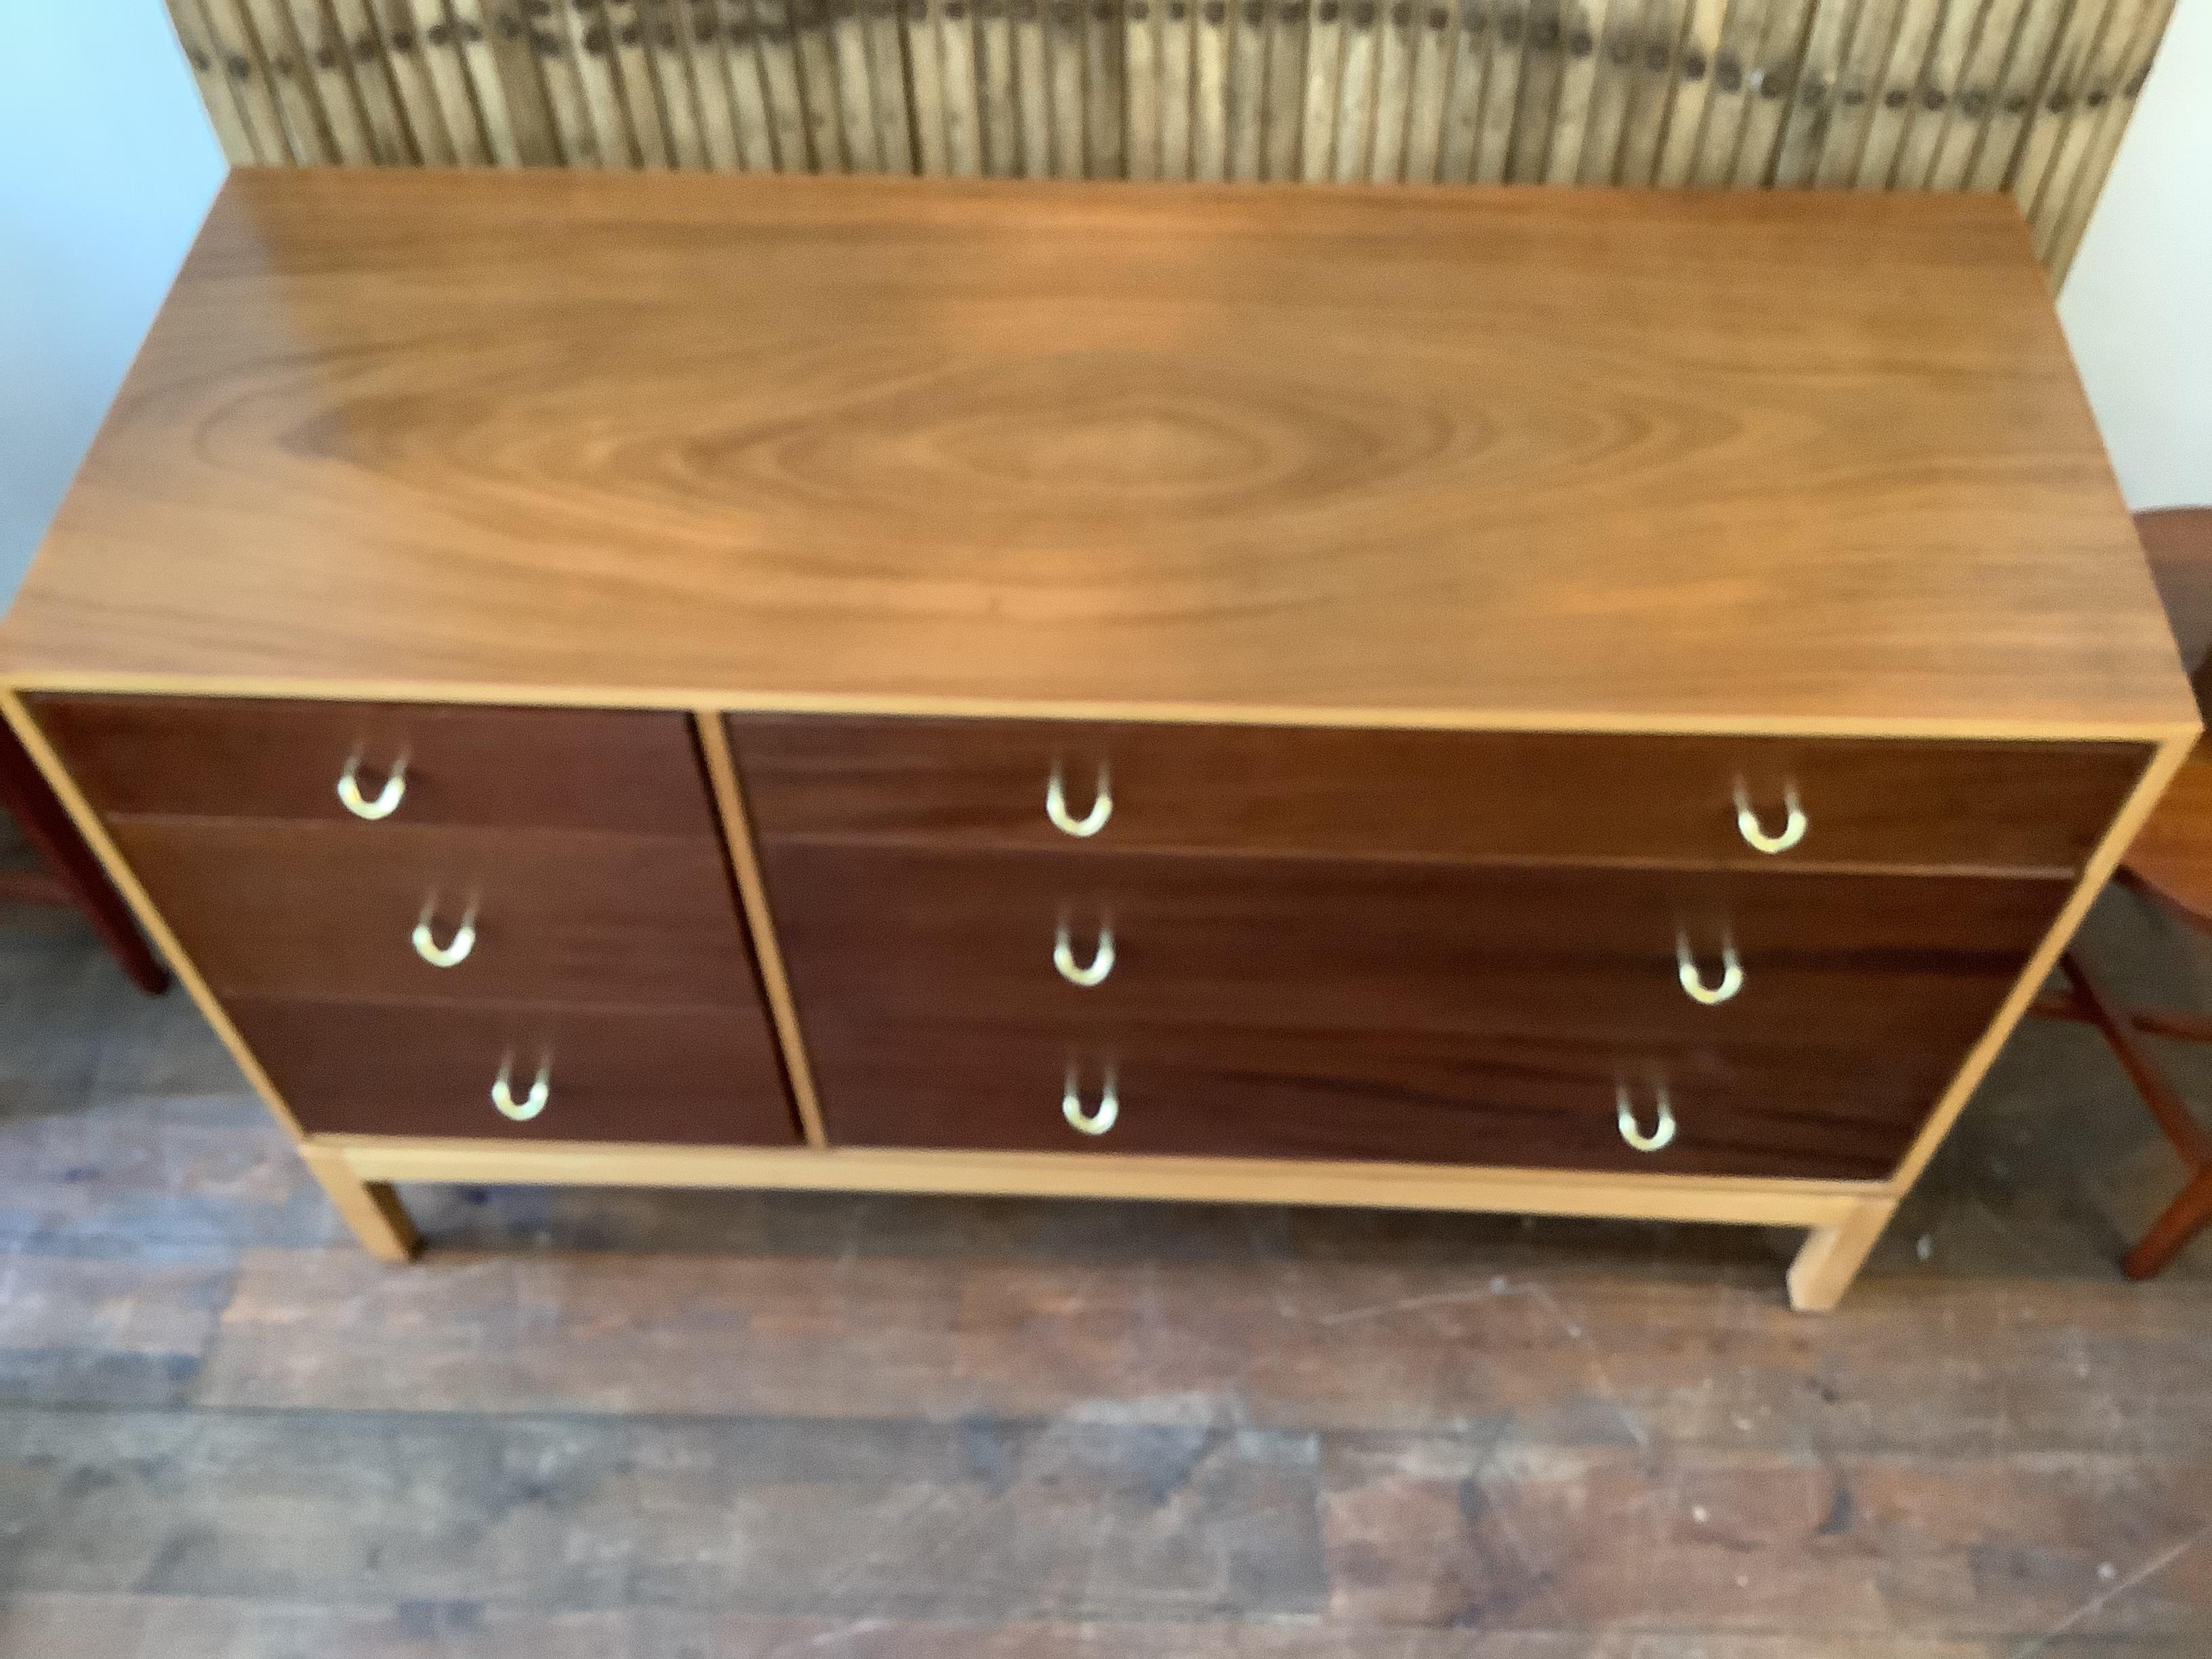 Mid century chest of drawers.
Designed by John & Sylvia Reid for Stag Furniture.
Two toned teak wood in colours dark brown and light brown.
Featuring real brass handles and a range of drawer compartments in various sizes.
Ideal for Minimalist